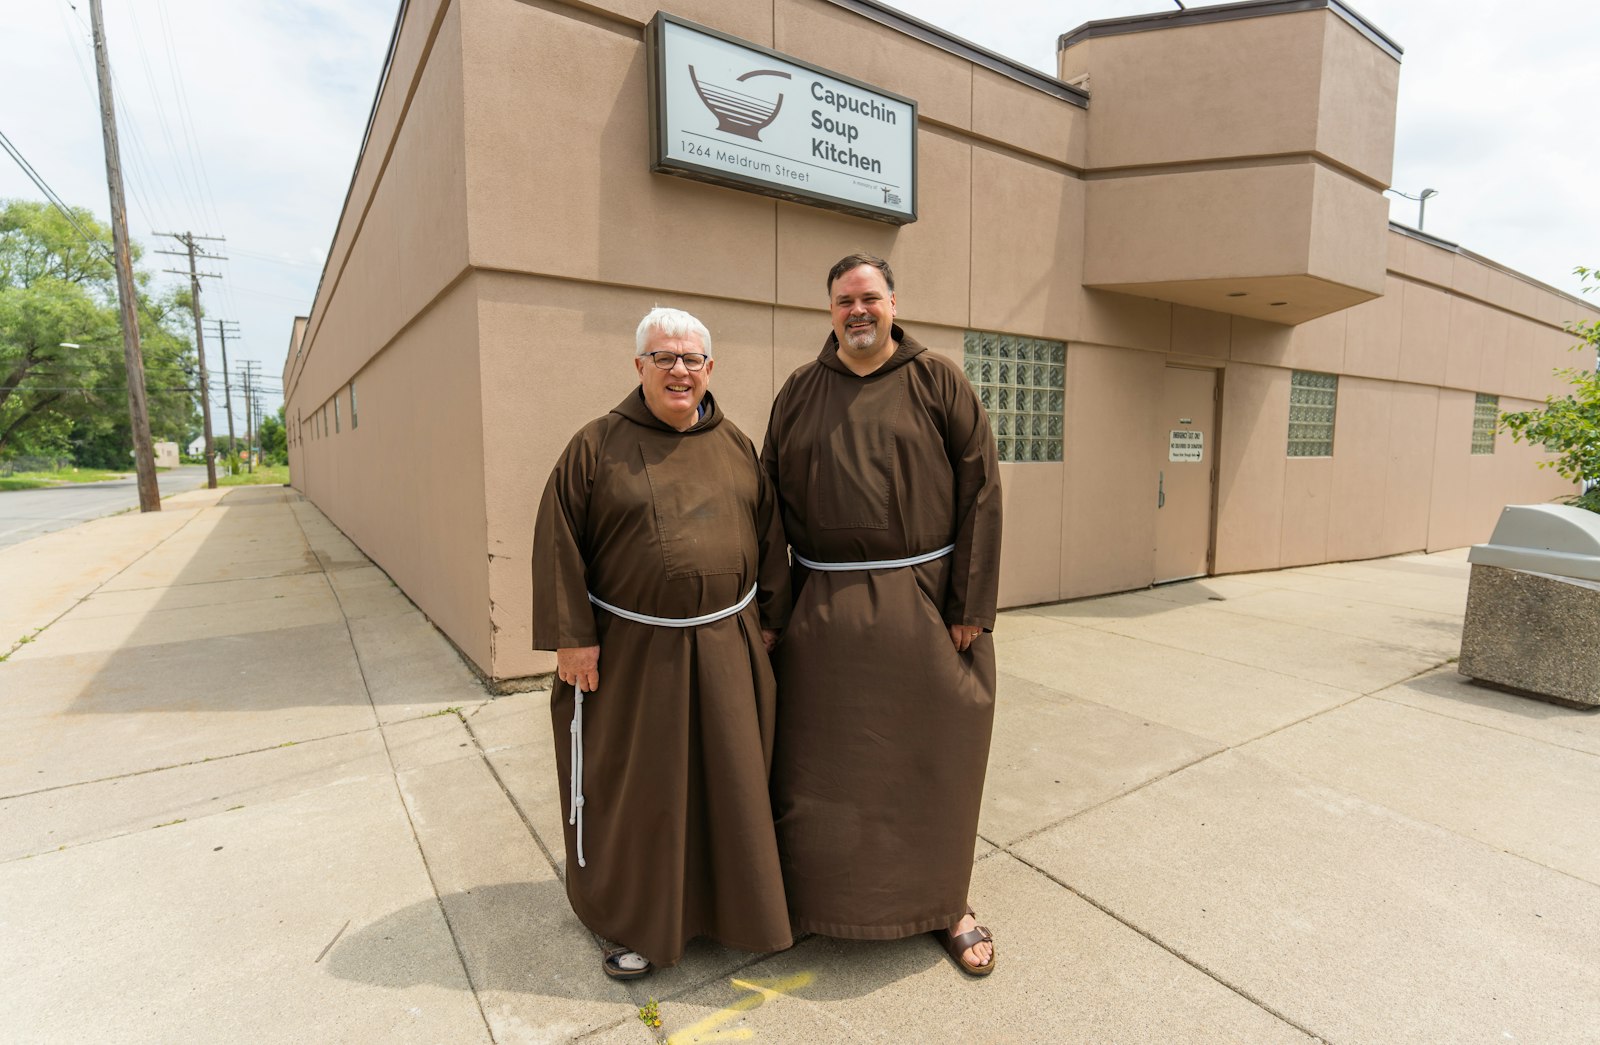 Bro. Gary Wegner, OFM Cap., left, executive director of the Capuchin Soup Kitchen, stands with Bro. Steven Kropp, OFM Cap., director of the Solanus Casey Center, in front of the Capuchin Soup Kitchen in August 2021. (Valaurian Waller | Detroit Catholic)